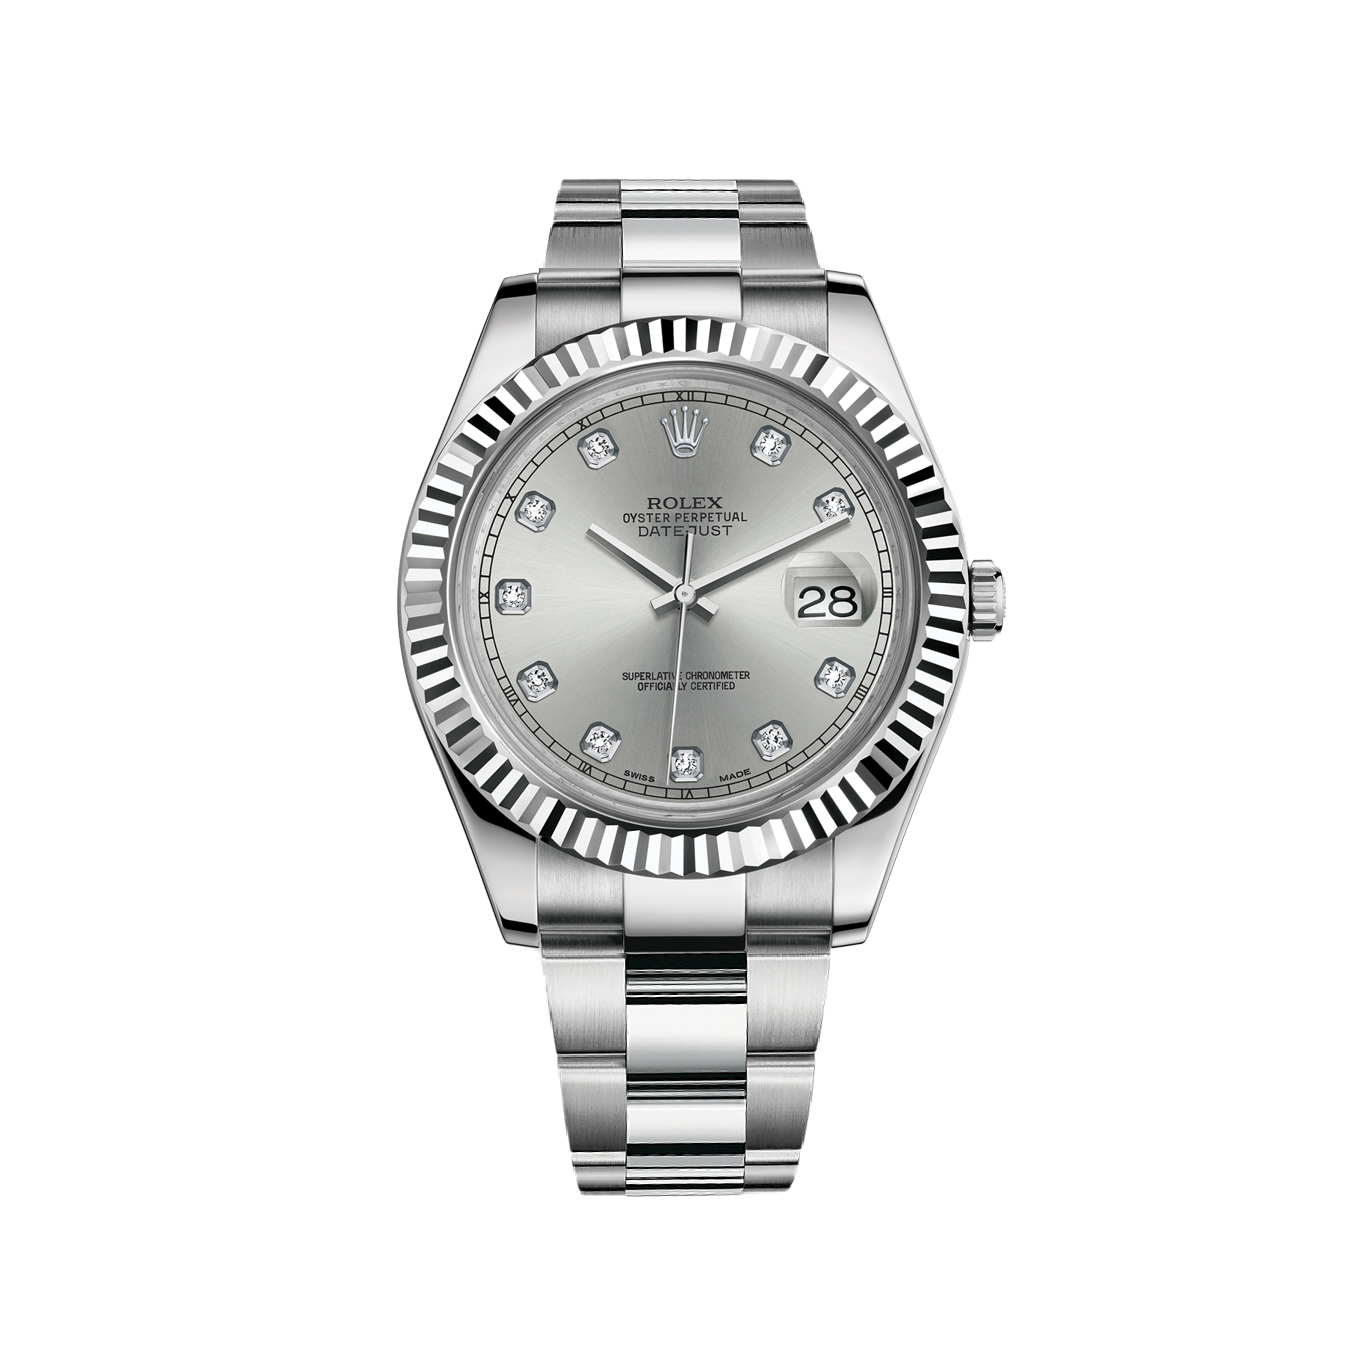 Datejust II 116334 White Gold & Stainless Steel Watch (Silver Set with Diamonds)